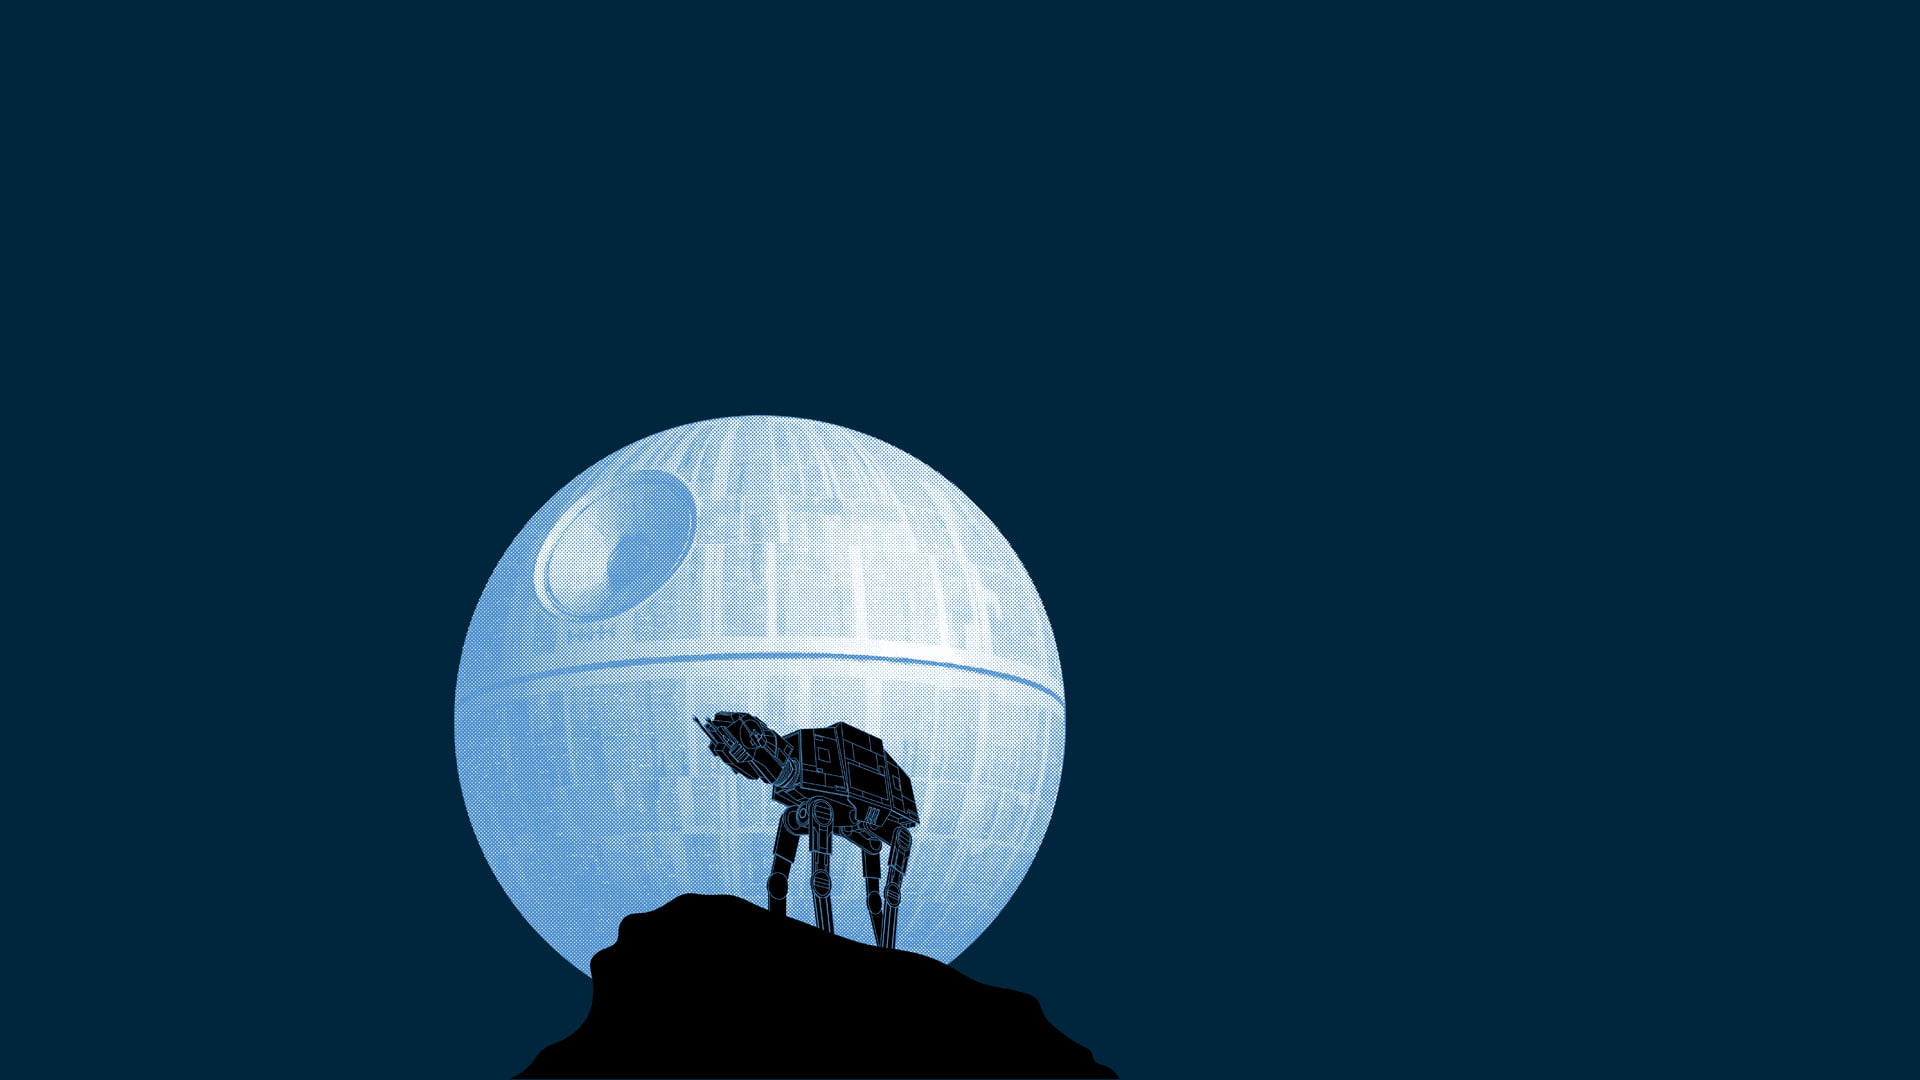 Star Wars ATAT and Death Star illustration, humor, AT-AT, silhouette